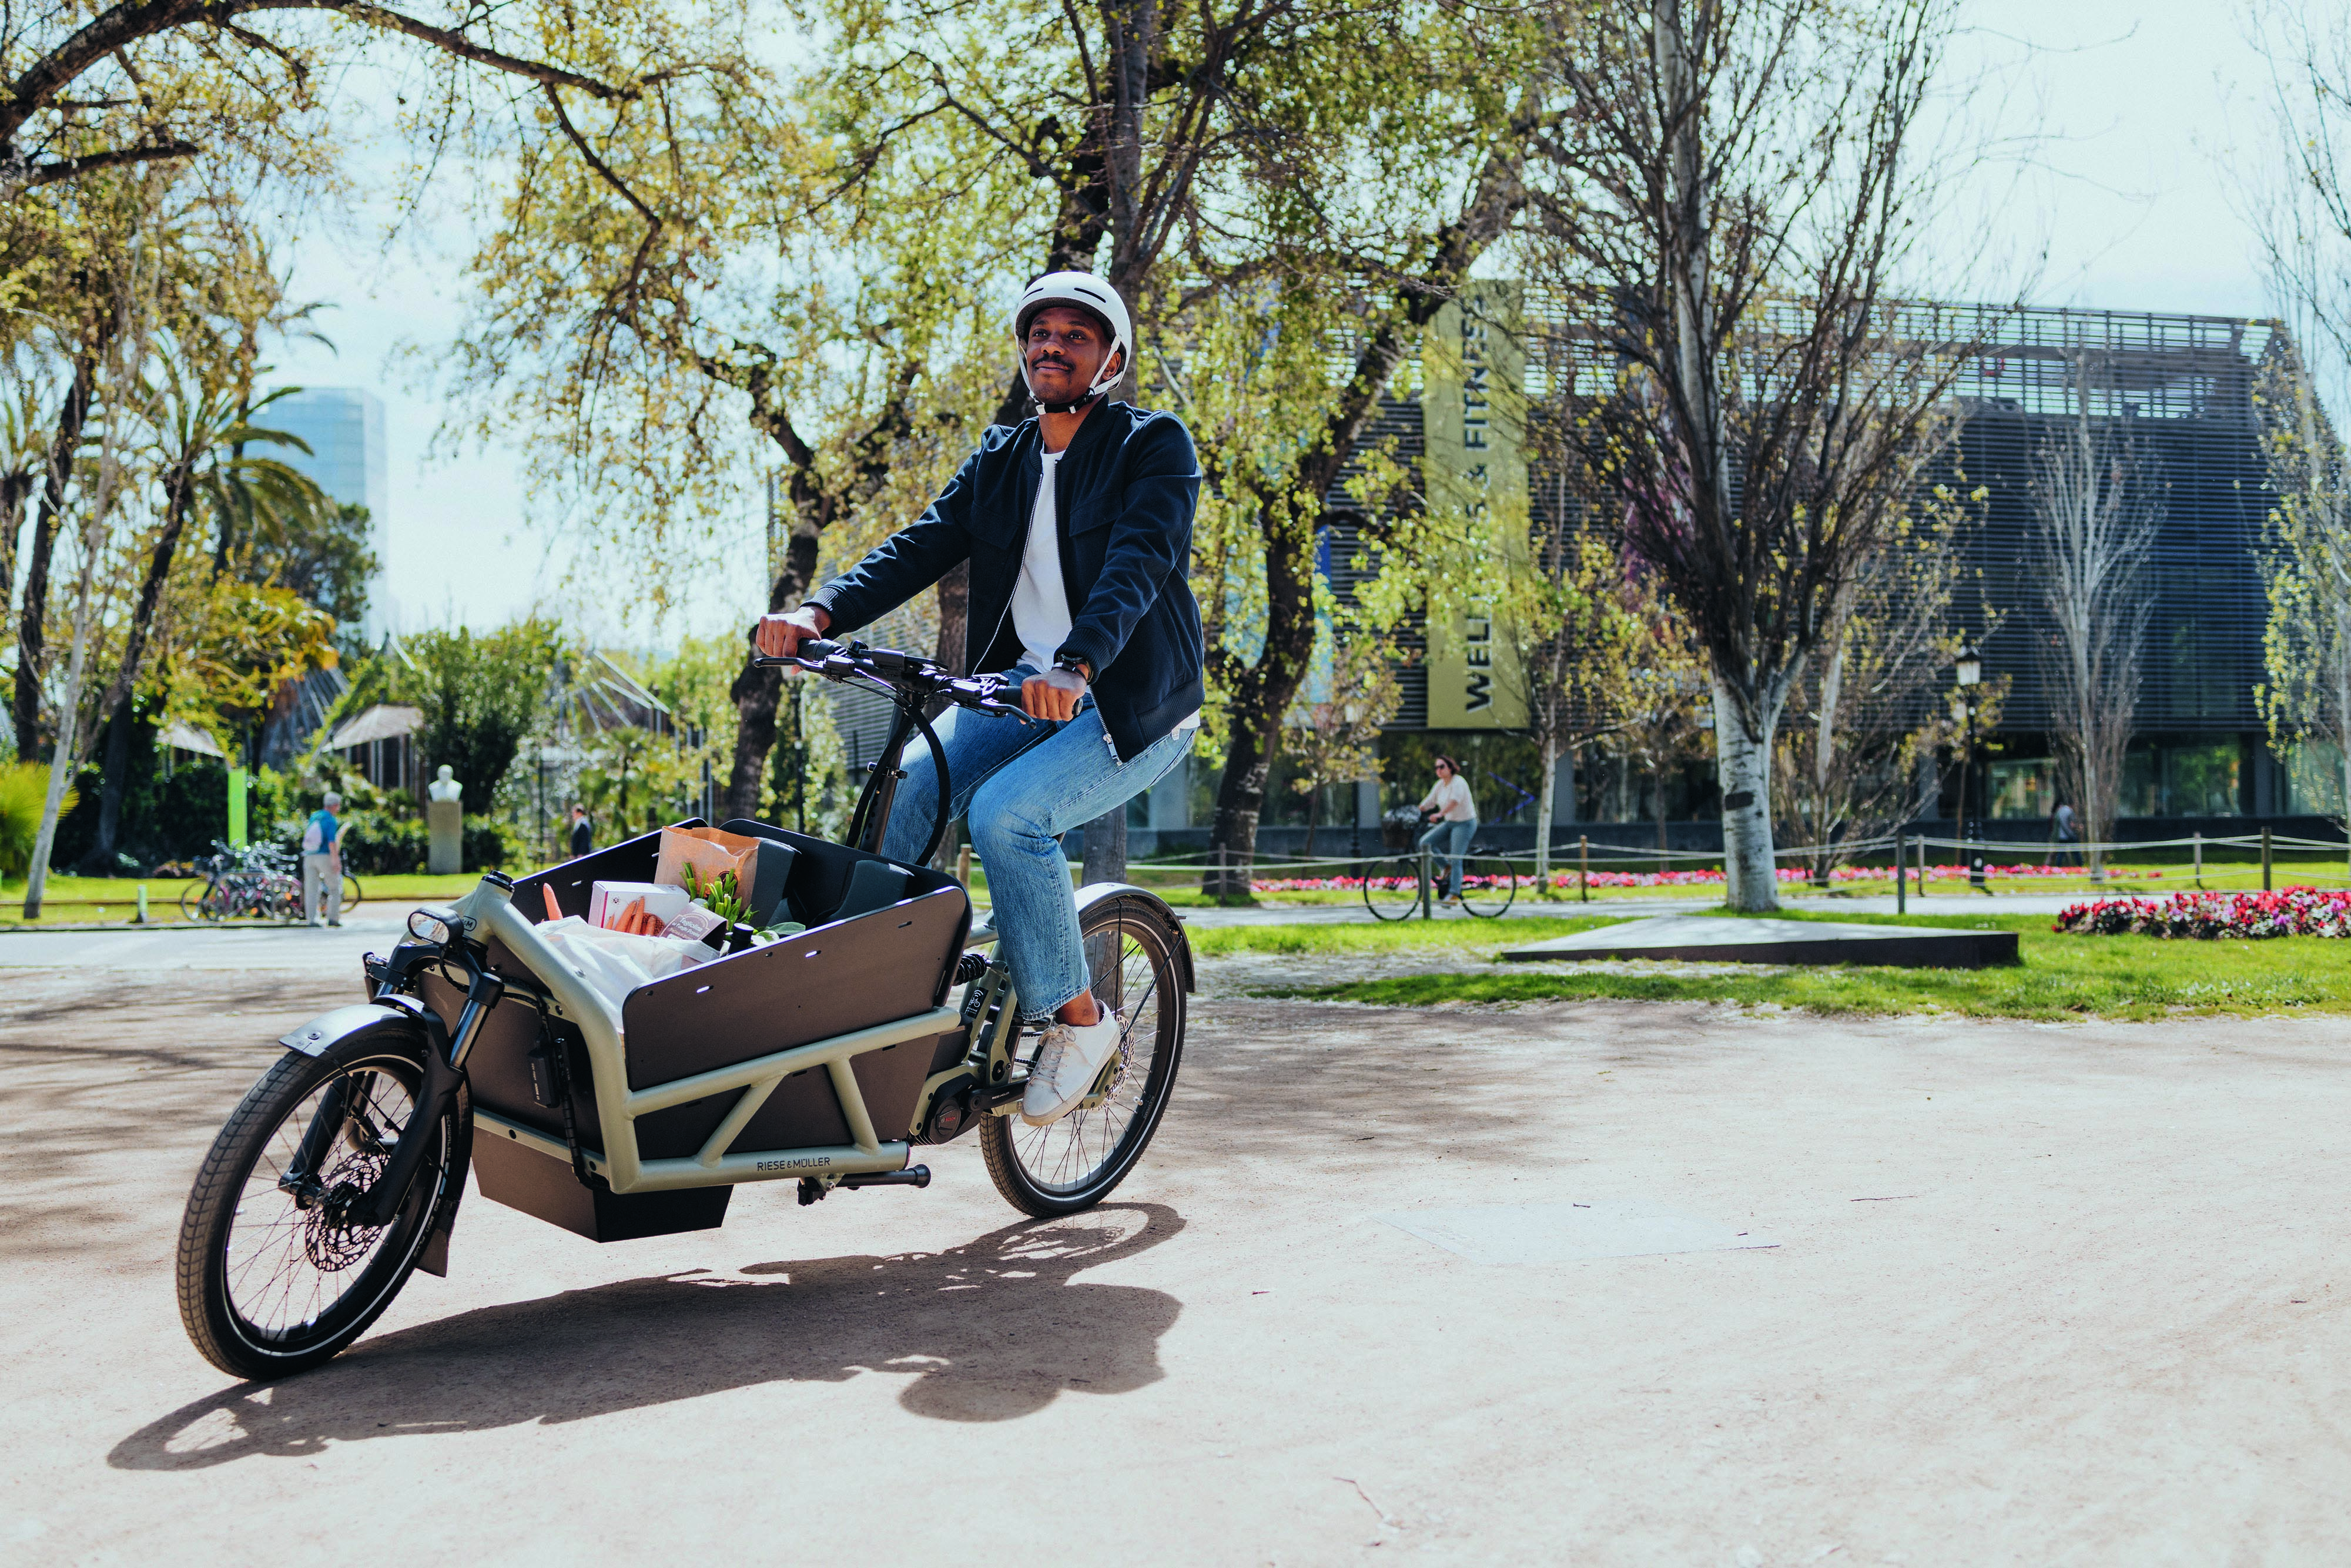 Cargo bike riders can now also enjoy the advantages of the smart system. Bosch eBike Systems ensures more safety and comfort with the new ABS Cargo and Cargo mode.